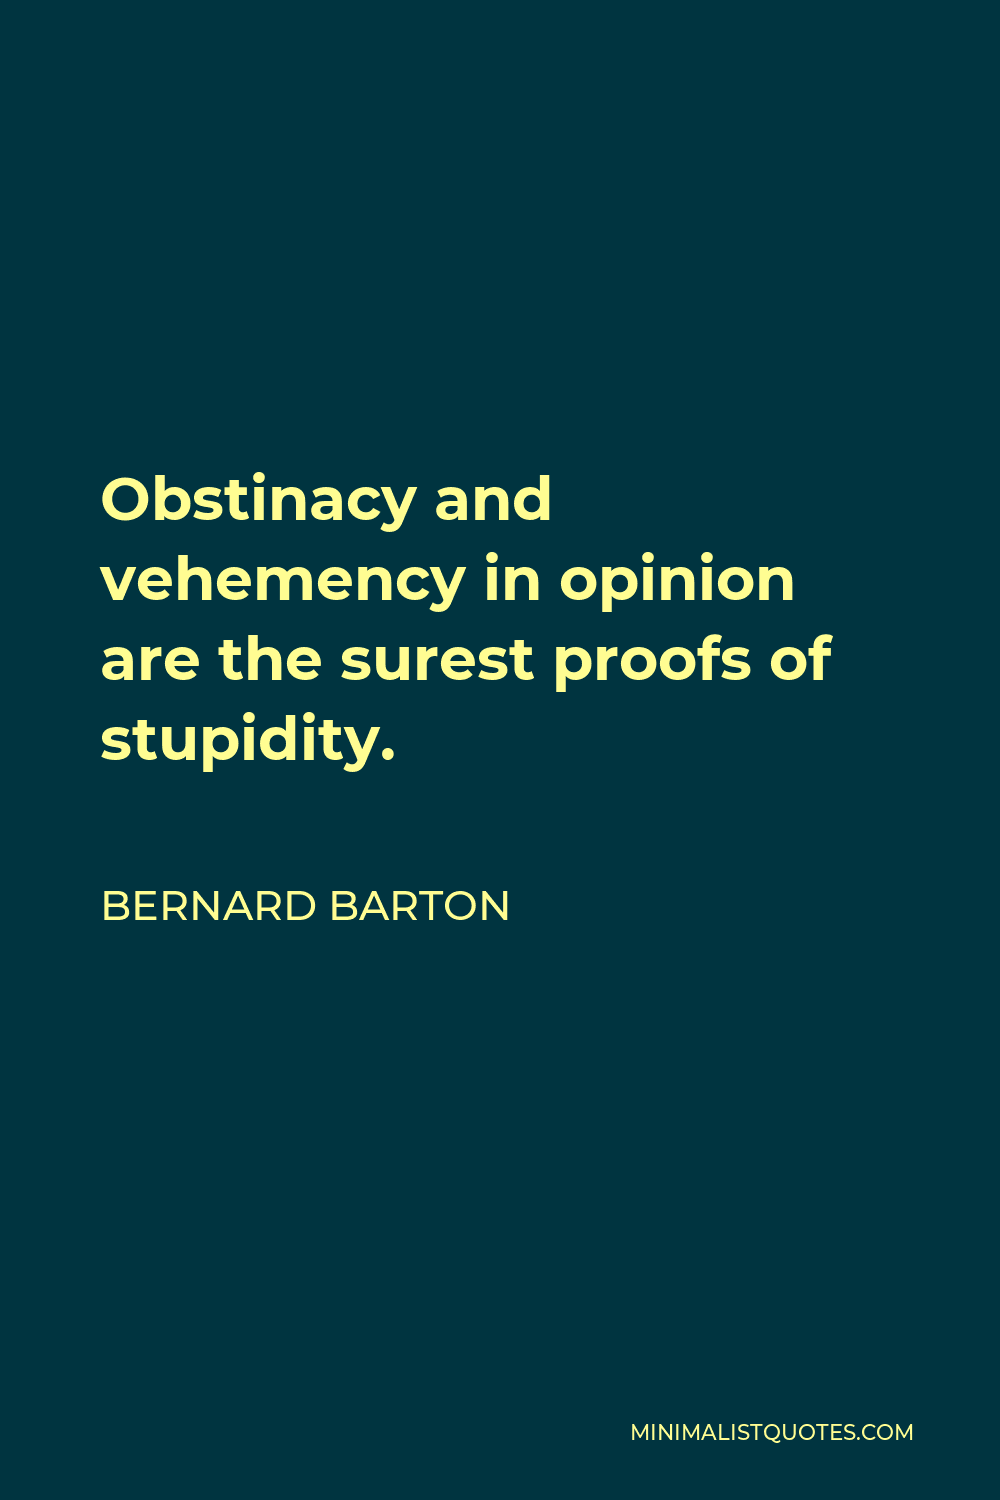 Bernard Barton Quote - Obstinacy and vehemency in opinion are the surest proofs of stupidity.